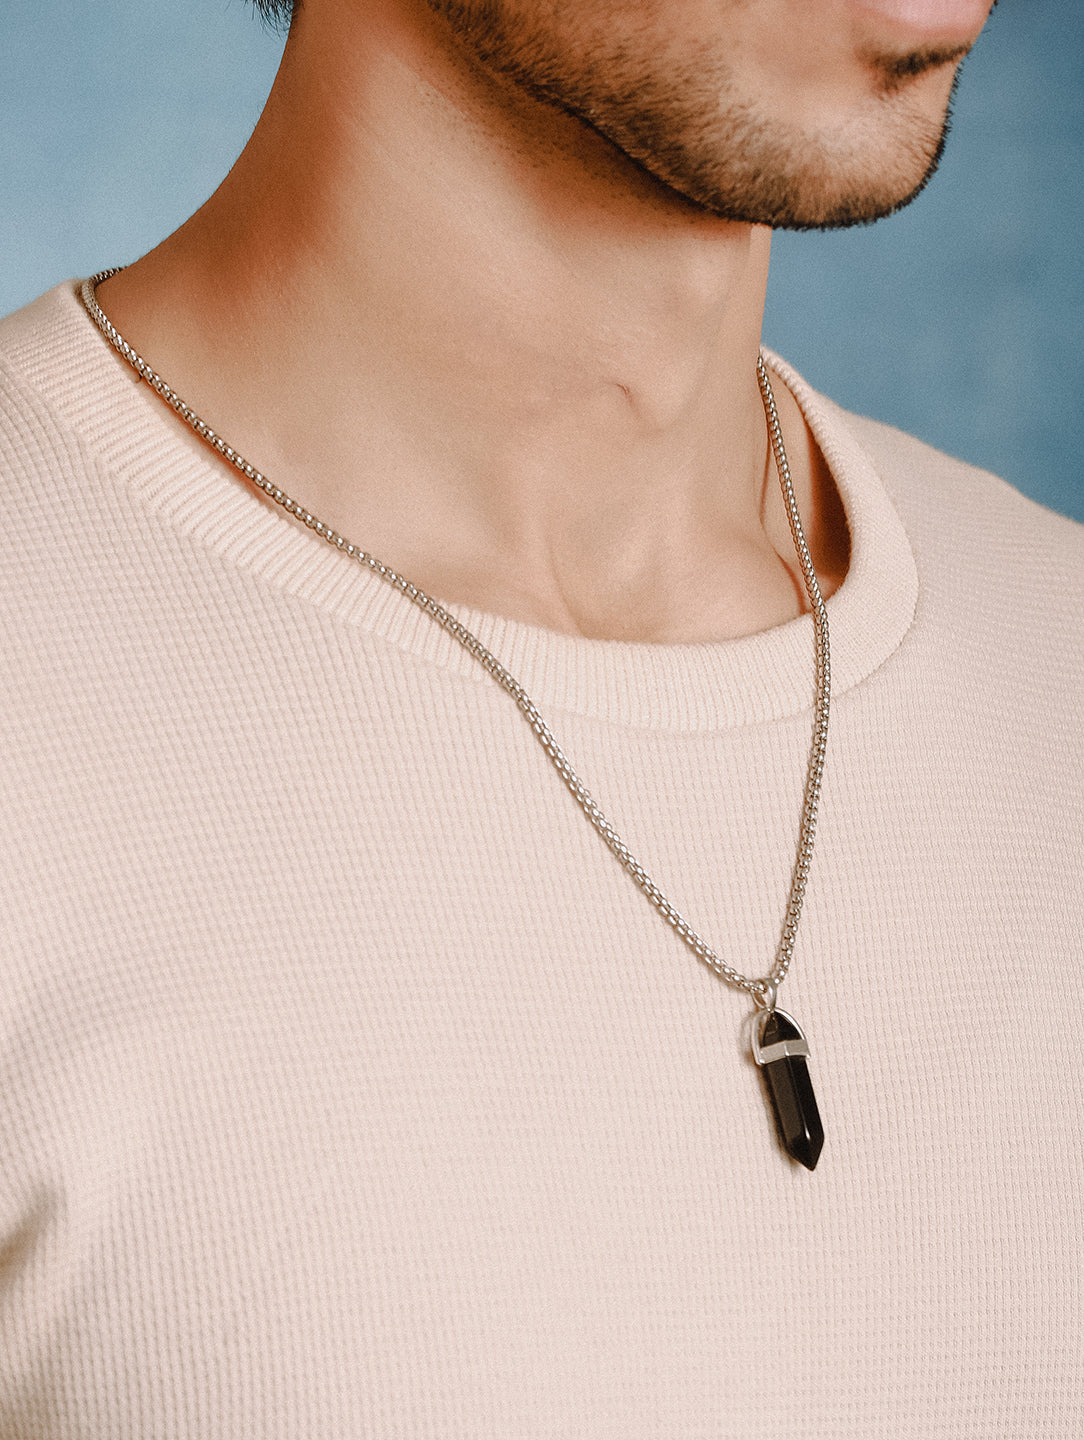 JAZZ AND SIZZLE Mens Silver-Toned & Black Silver-Plated Necklace - Jazzandsizzle